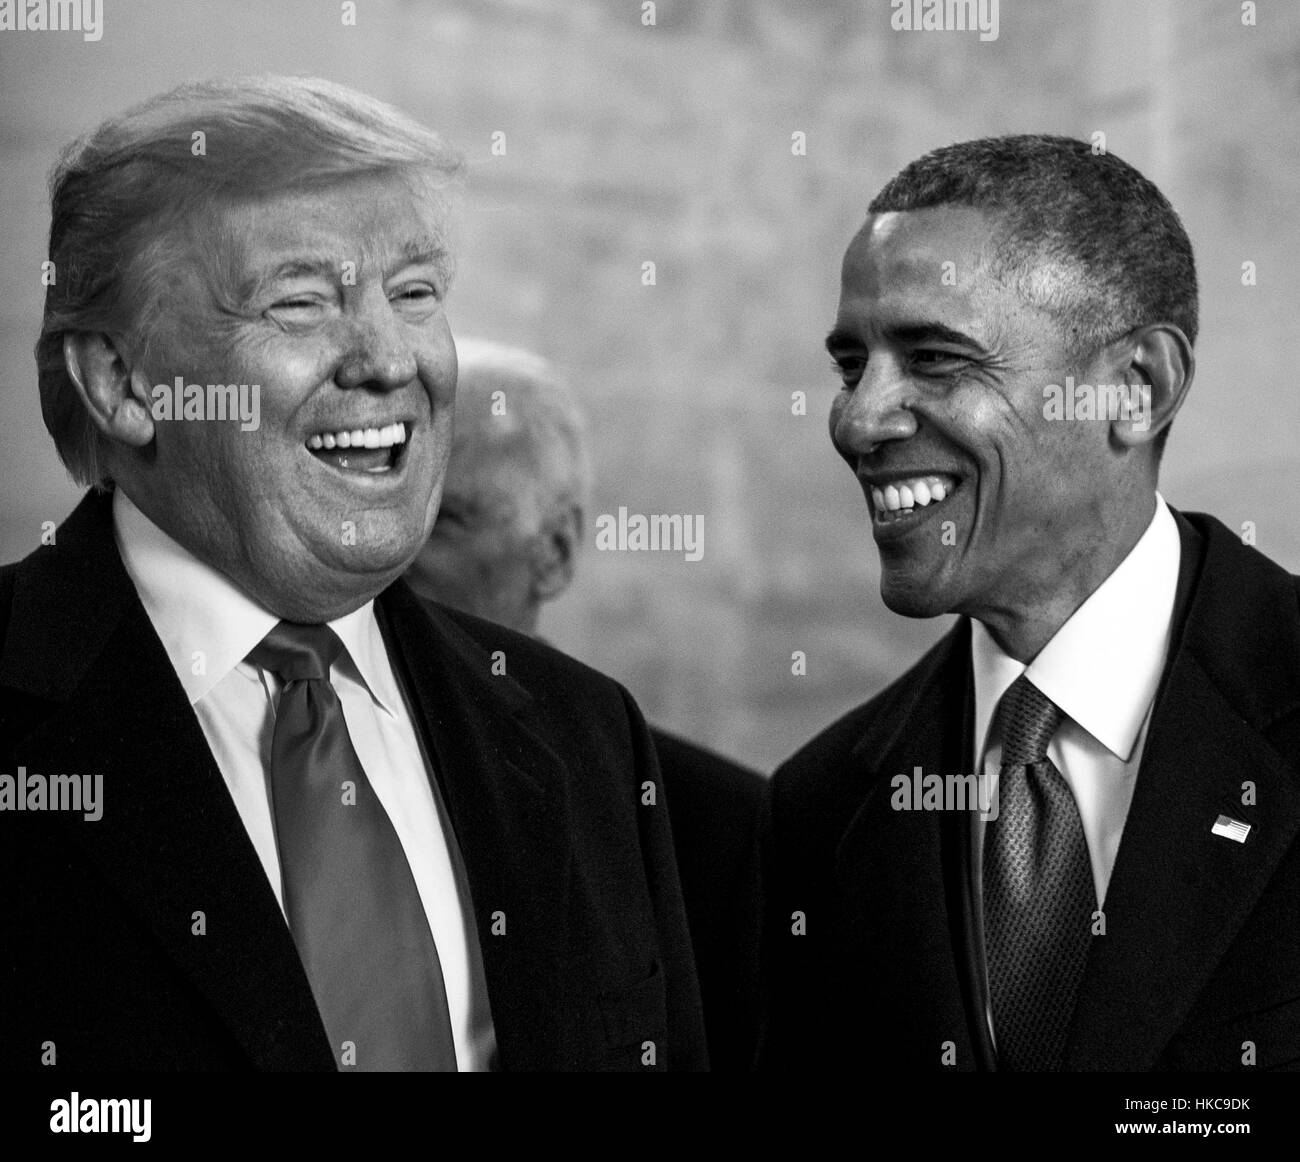 U.S. President Donald Trump and former President Barack Obama share a laugh as they walk toward the east steps at the U.S. Capitol for the departure ceremony during the 58th Presidential Inauguration January 20, 2017 in Washington, DC. Stock Photo